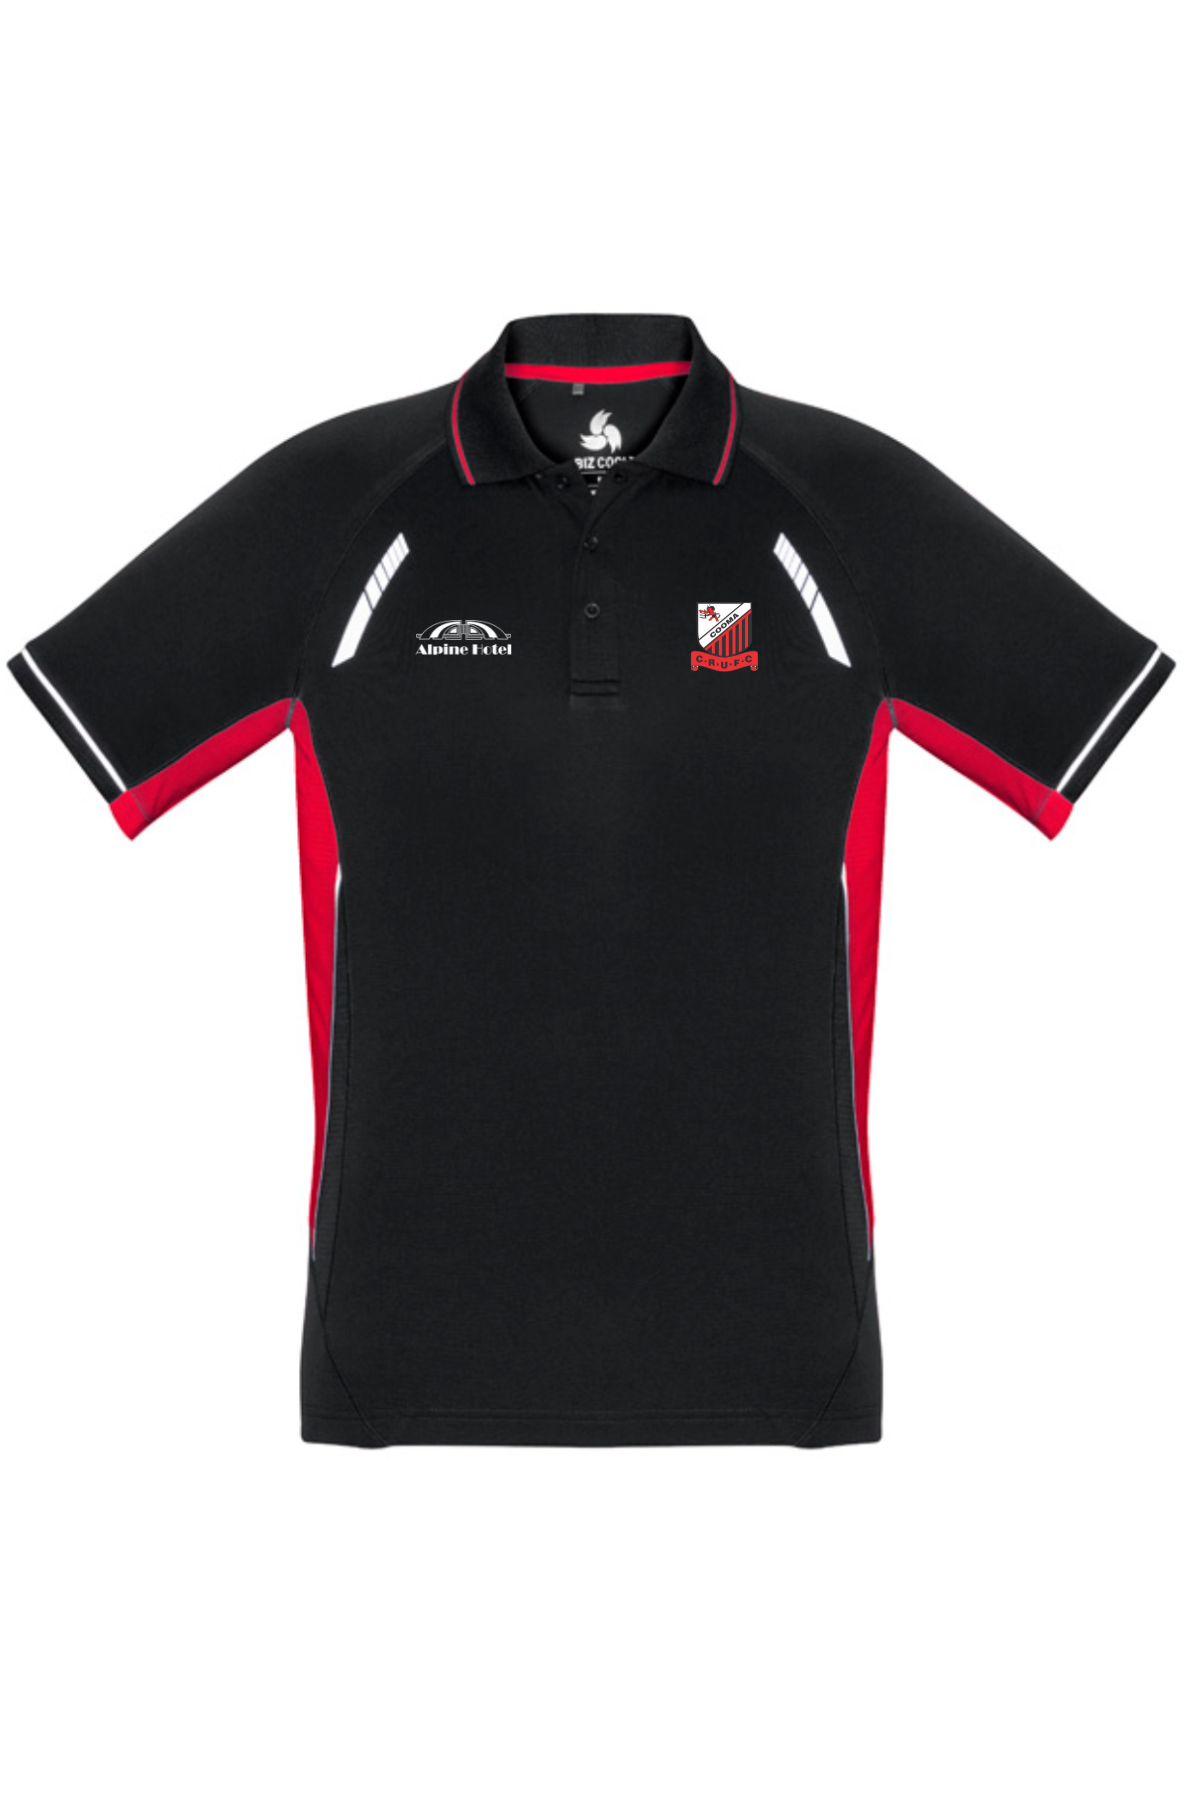 Cooma Rugby Red Devils Mens Polo